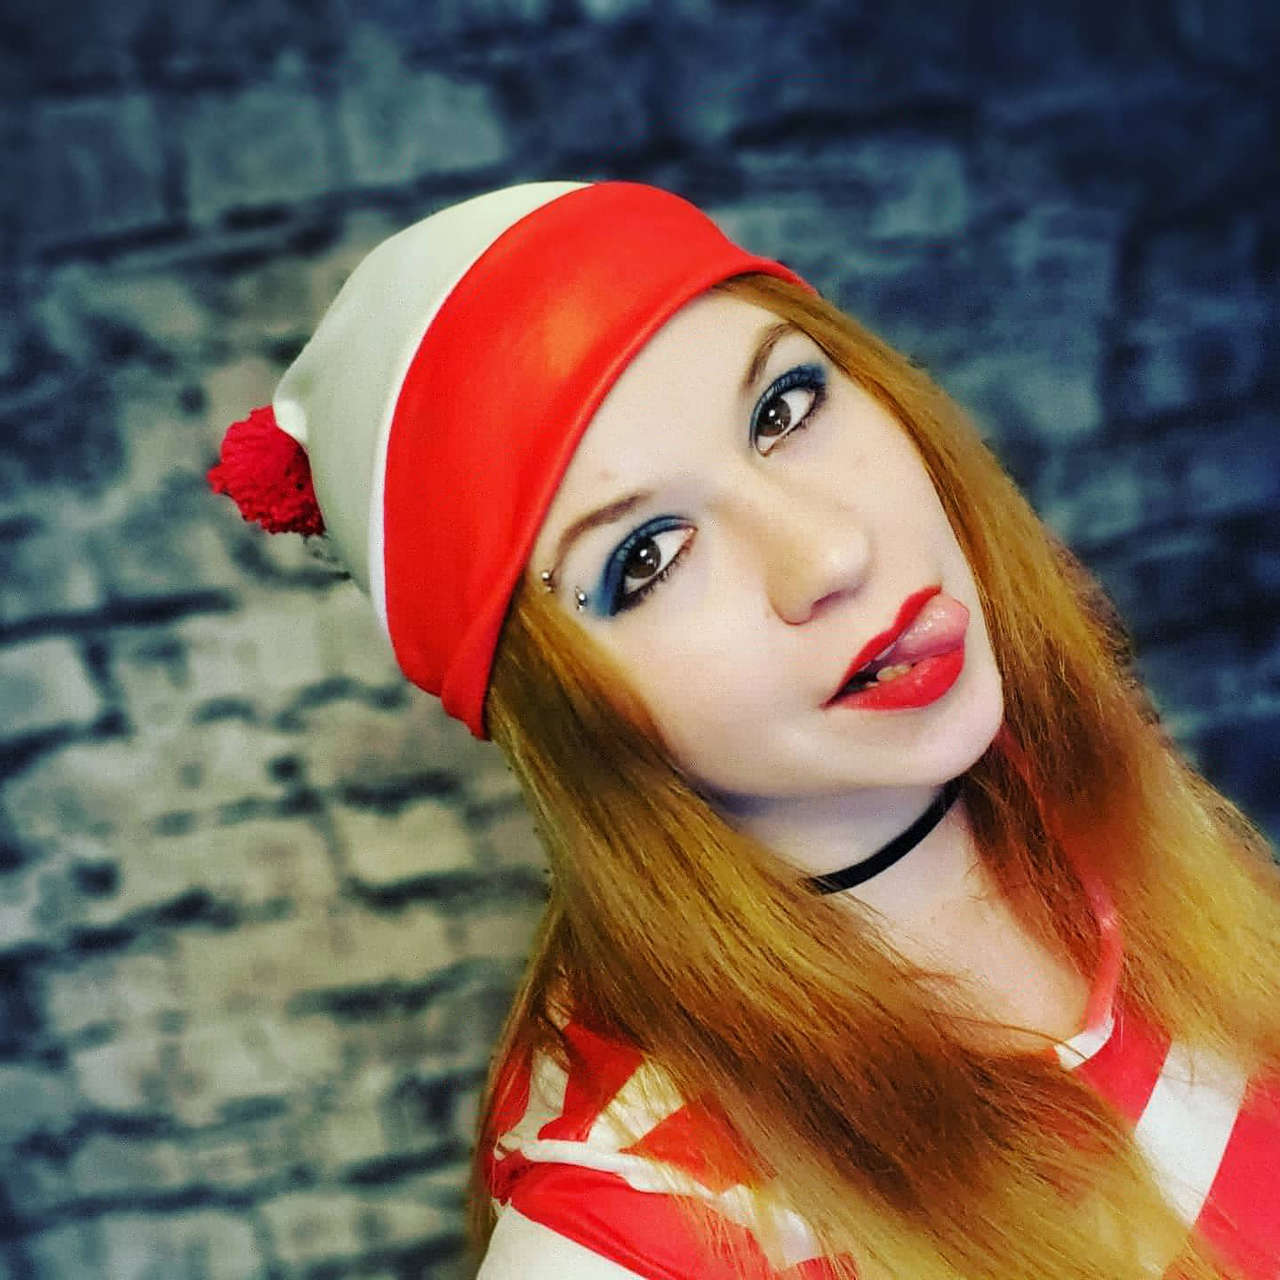 NSFW Where The Heck Is Waldo Fayedreamr Self Instagram Patreon